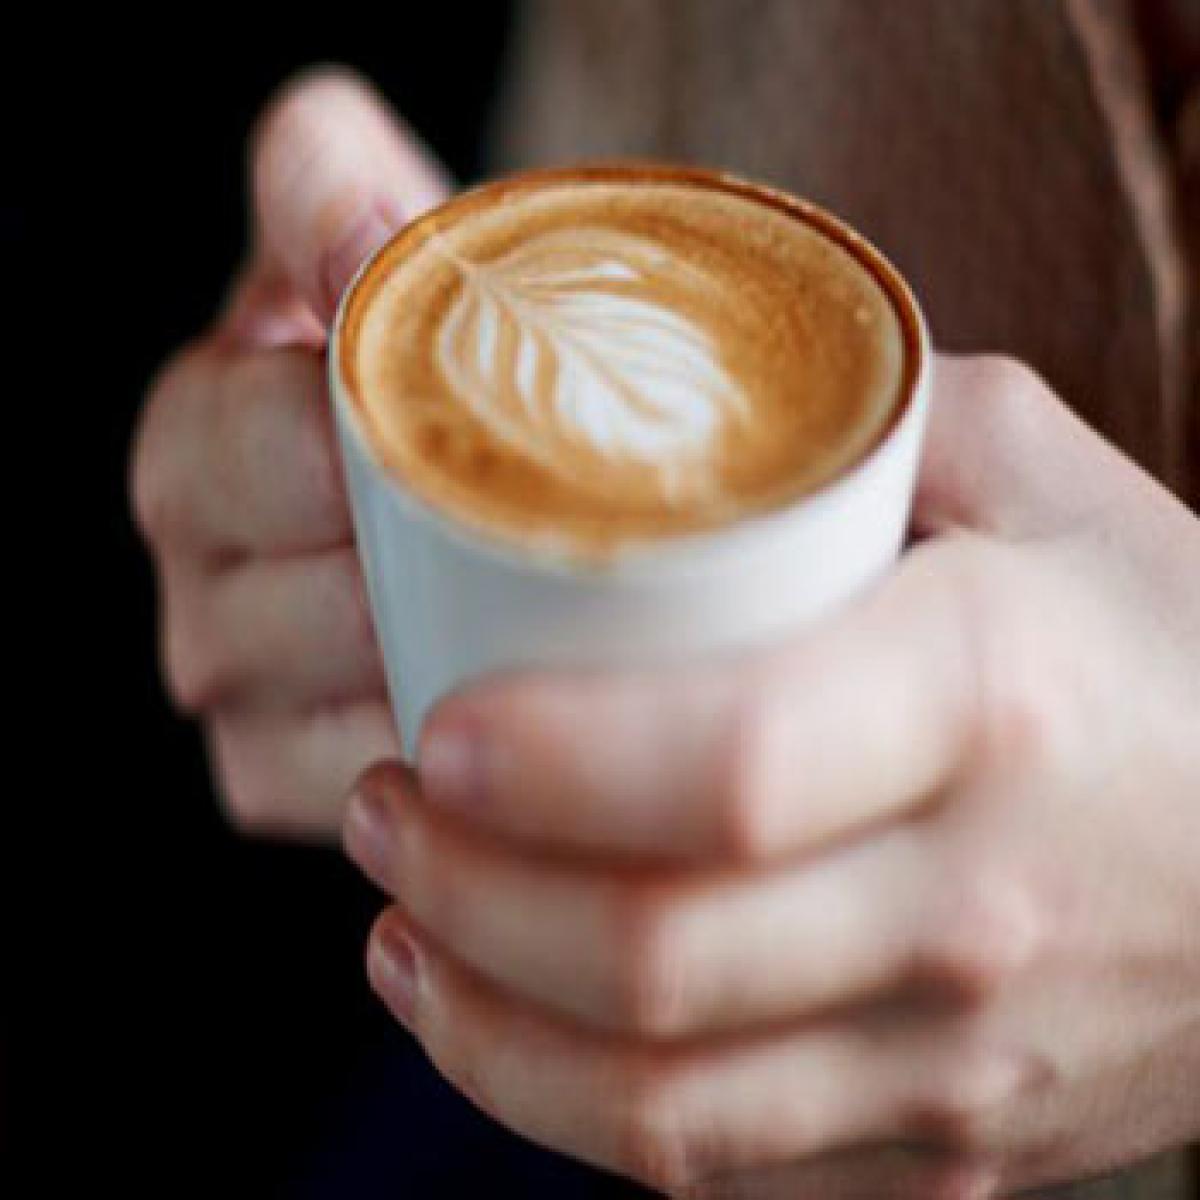 Coffee may help you stick to fitness regime